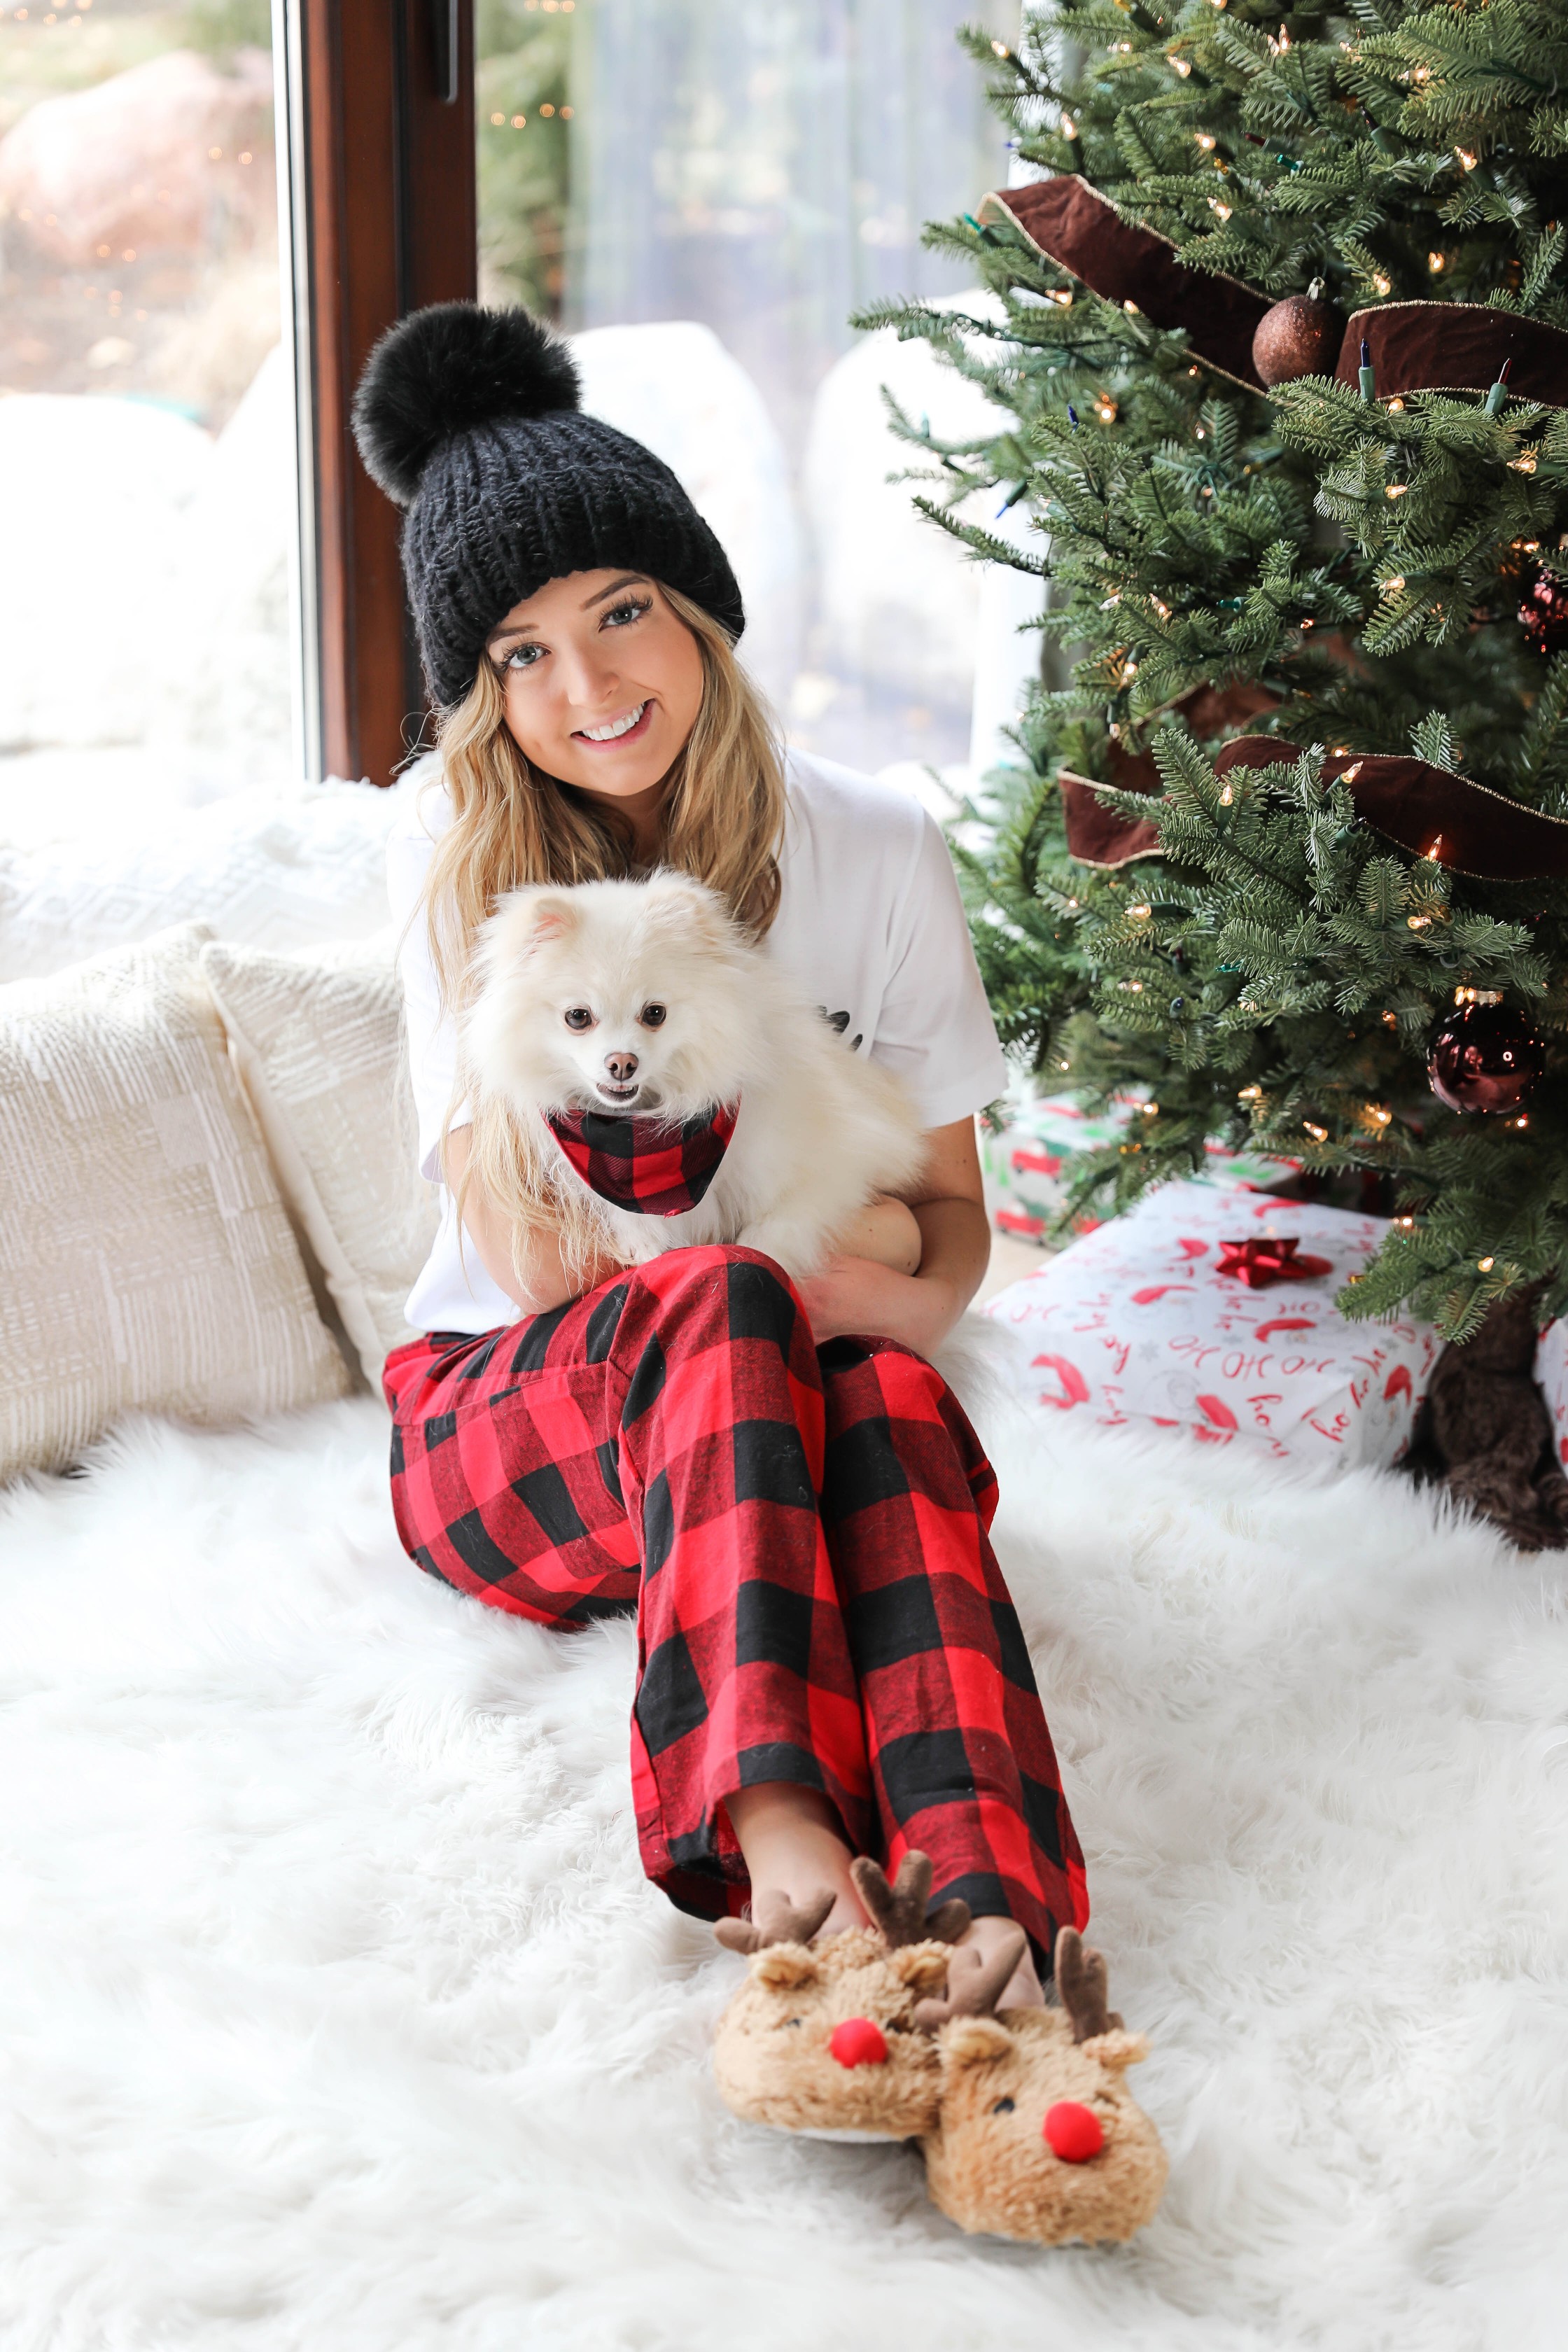 Matching pajamas with my puppy! My dog and I wear matching chrismas pjs every year! This is my puppy, beau, the pomeranian! Cute Christmas photoshoot on fashion blog daily dose of charm by lauren lindmark